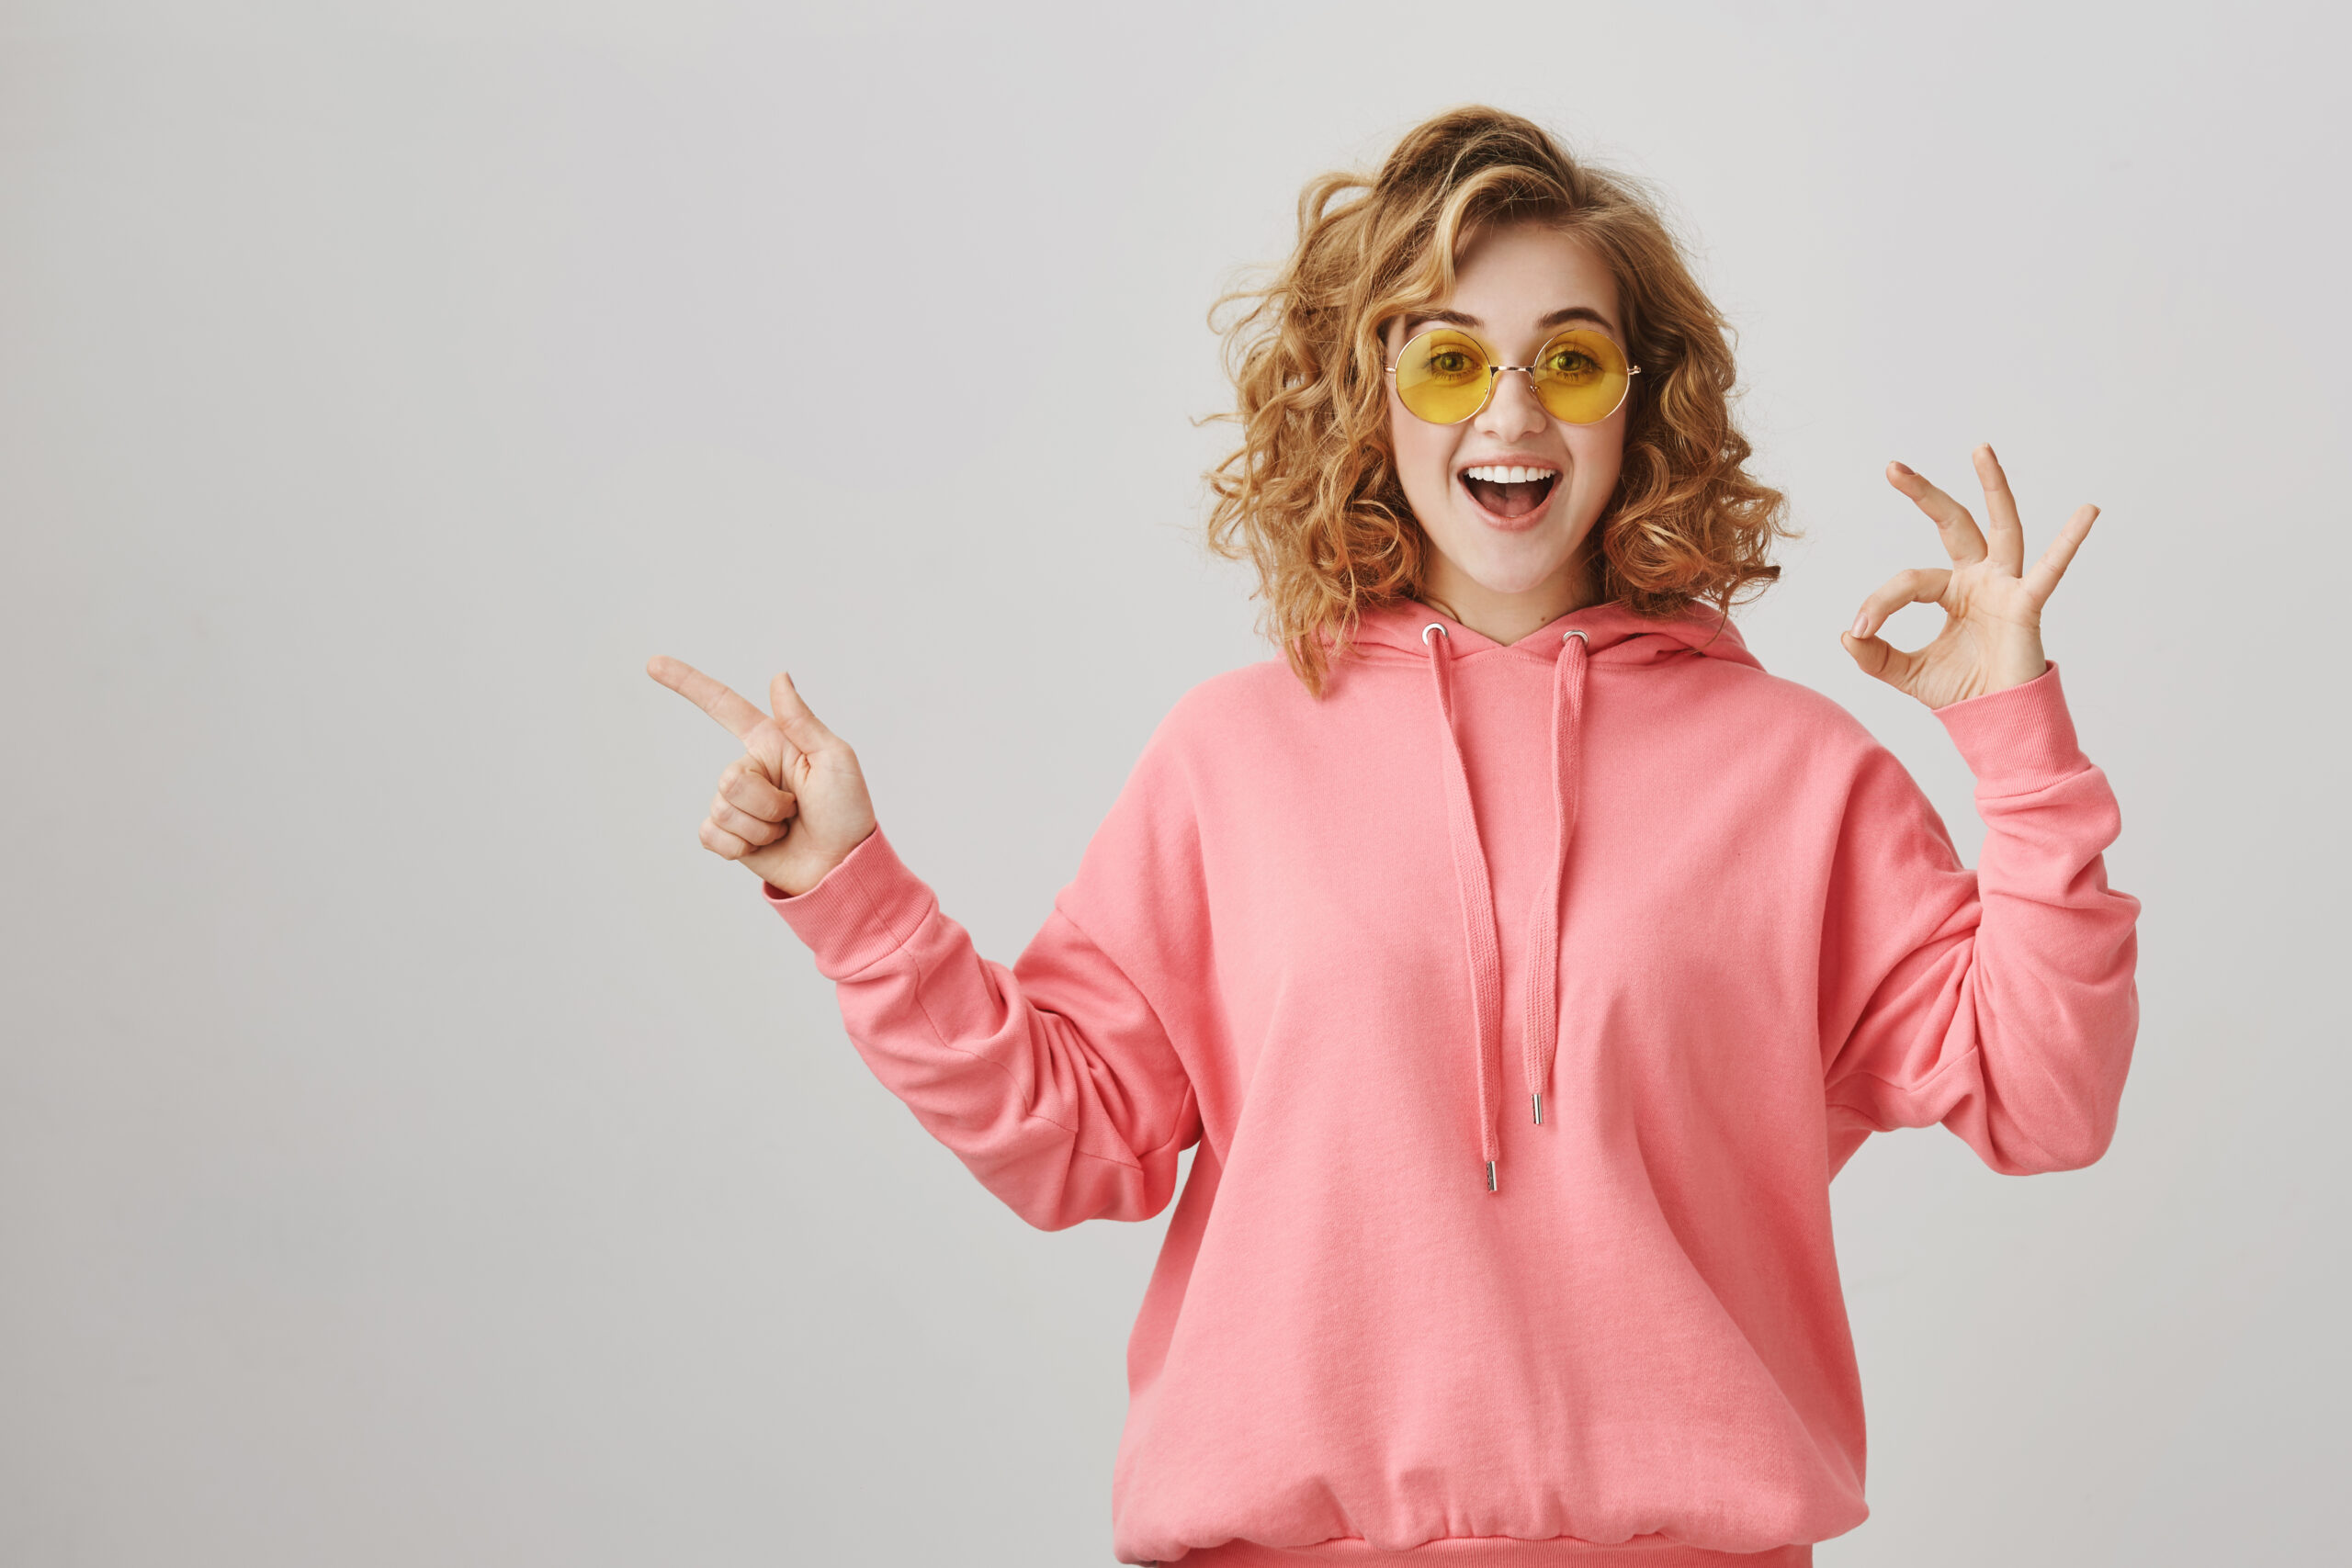 Studio portrait of emotive happy feminine woman with curly hair, wearing casual hoodie and sunglasses showing ok sign and pointing left with index finger, smiling with excitement over gray background